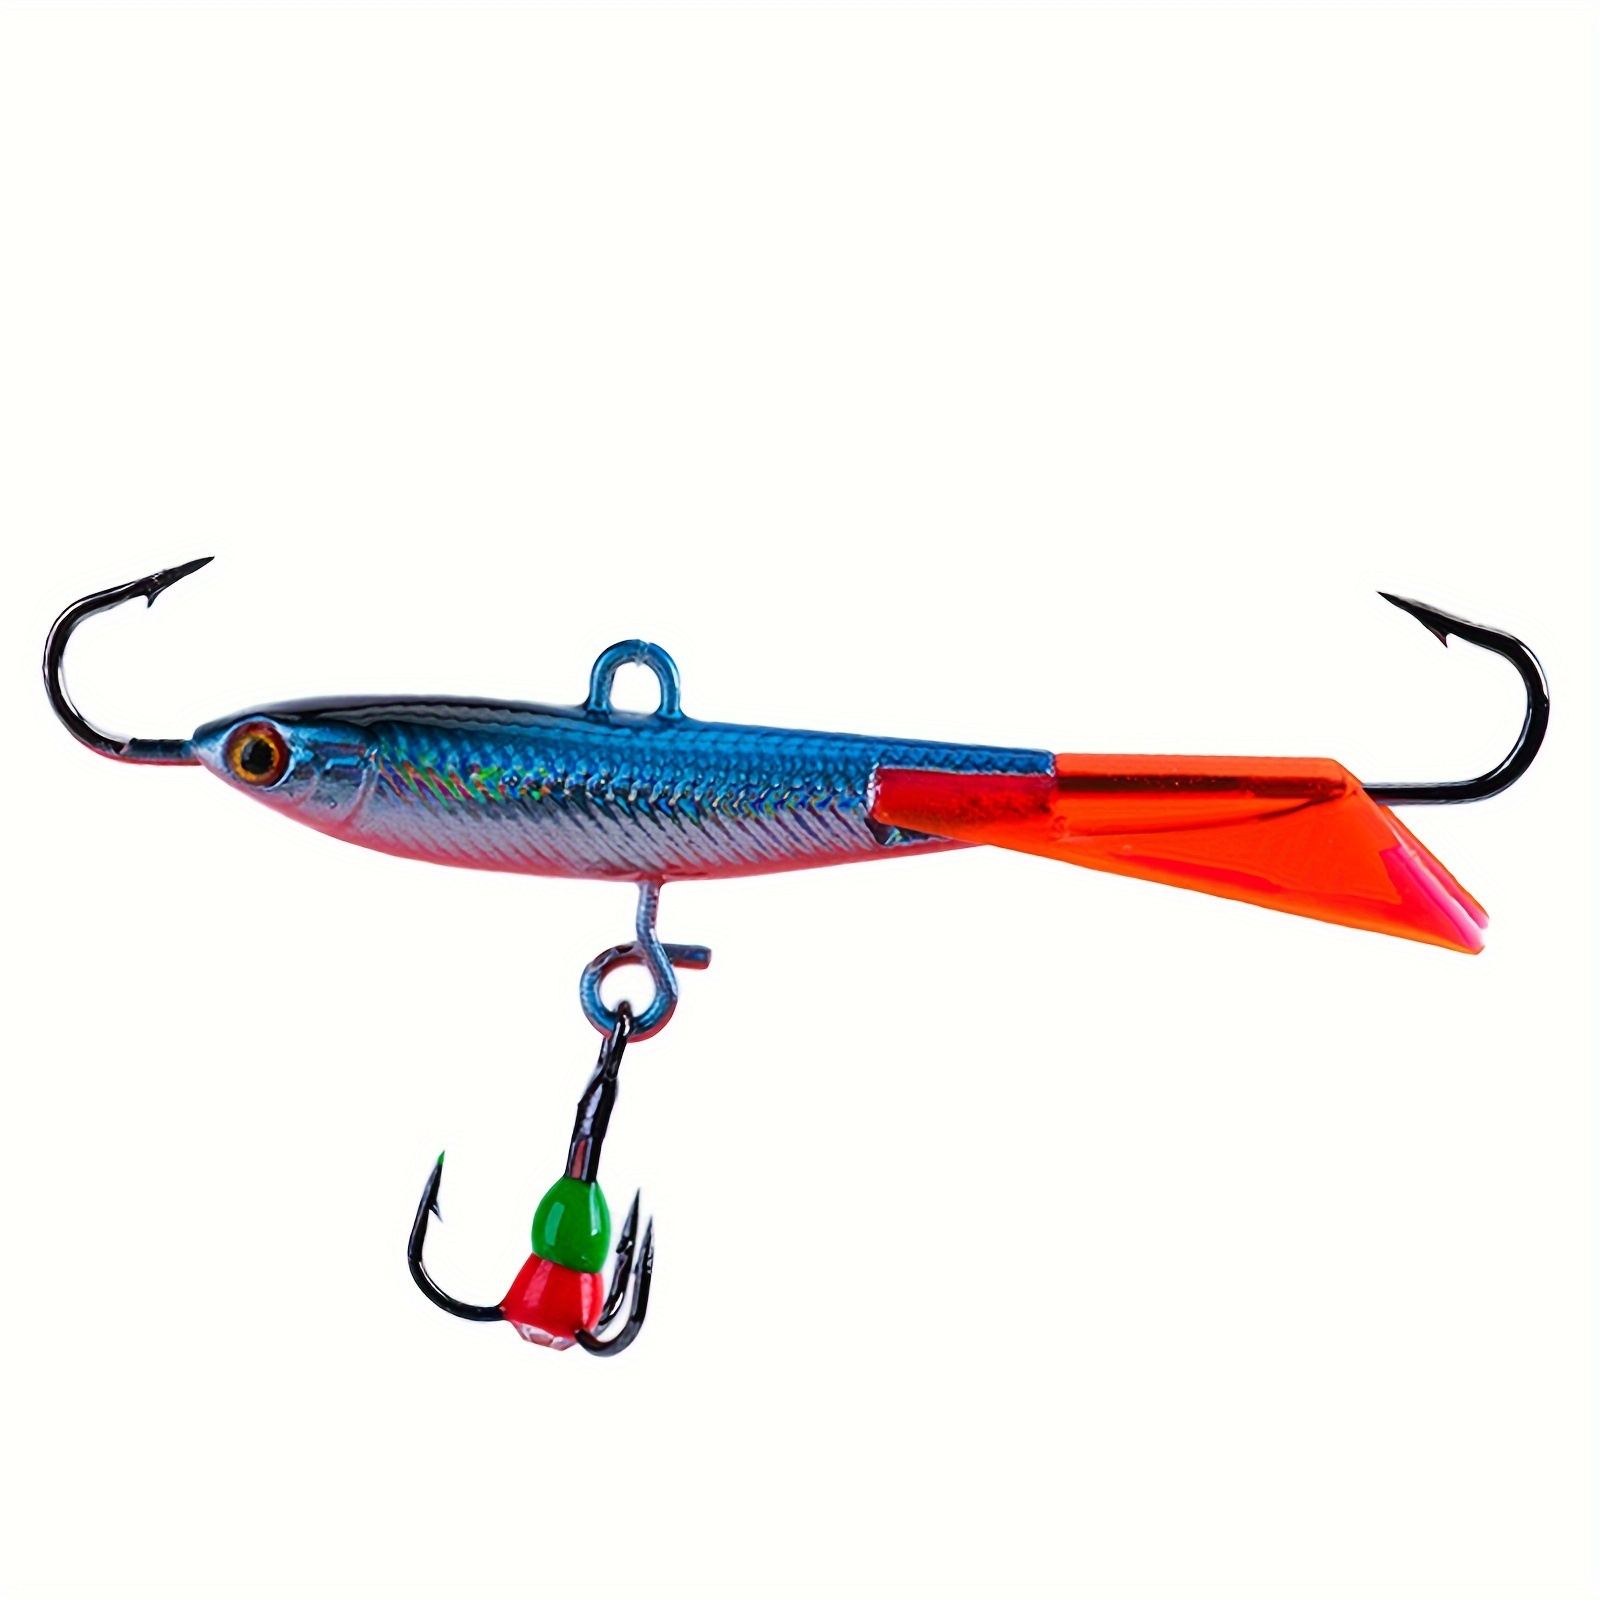  QUICKSET ICE Fishing Hook Setter 3 QUICKSETS for JUST $10 :  Sports & Outdoors